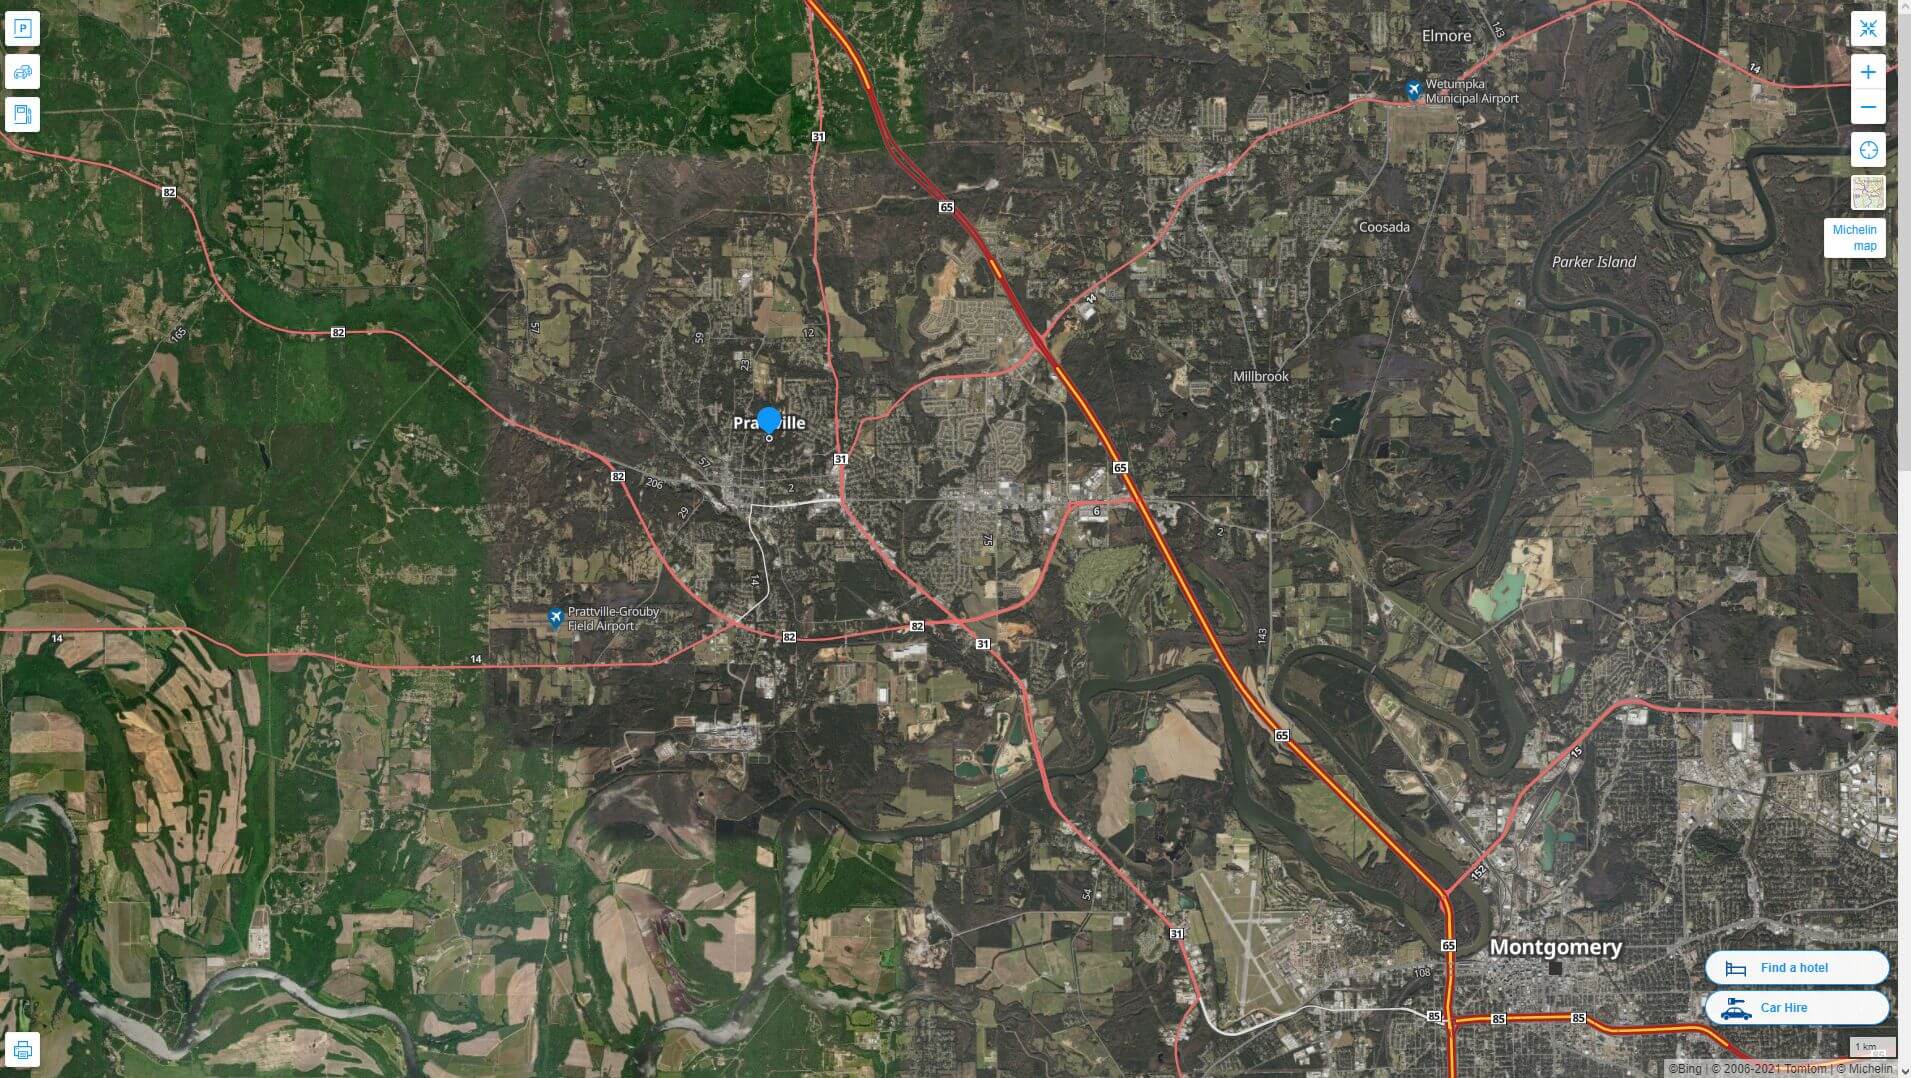 Prattville Alabama Highway and Road Map with Satellite View